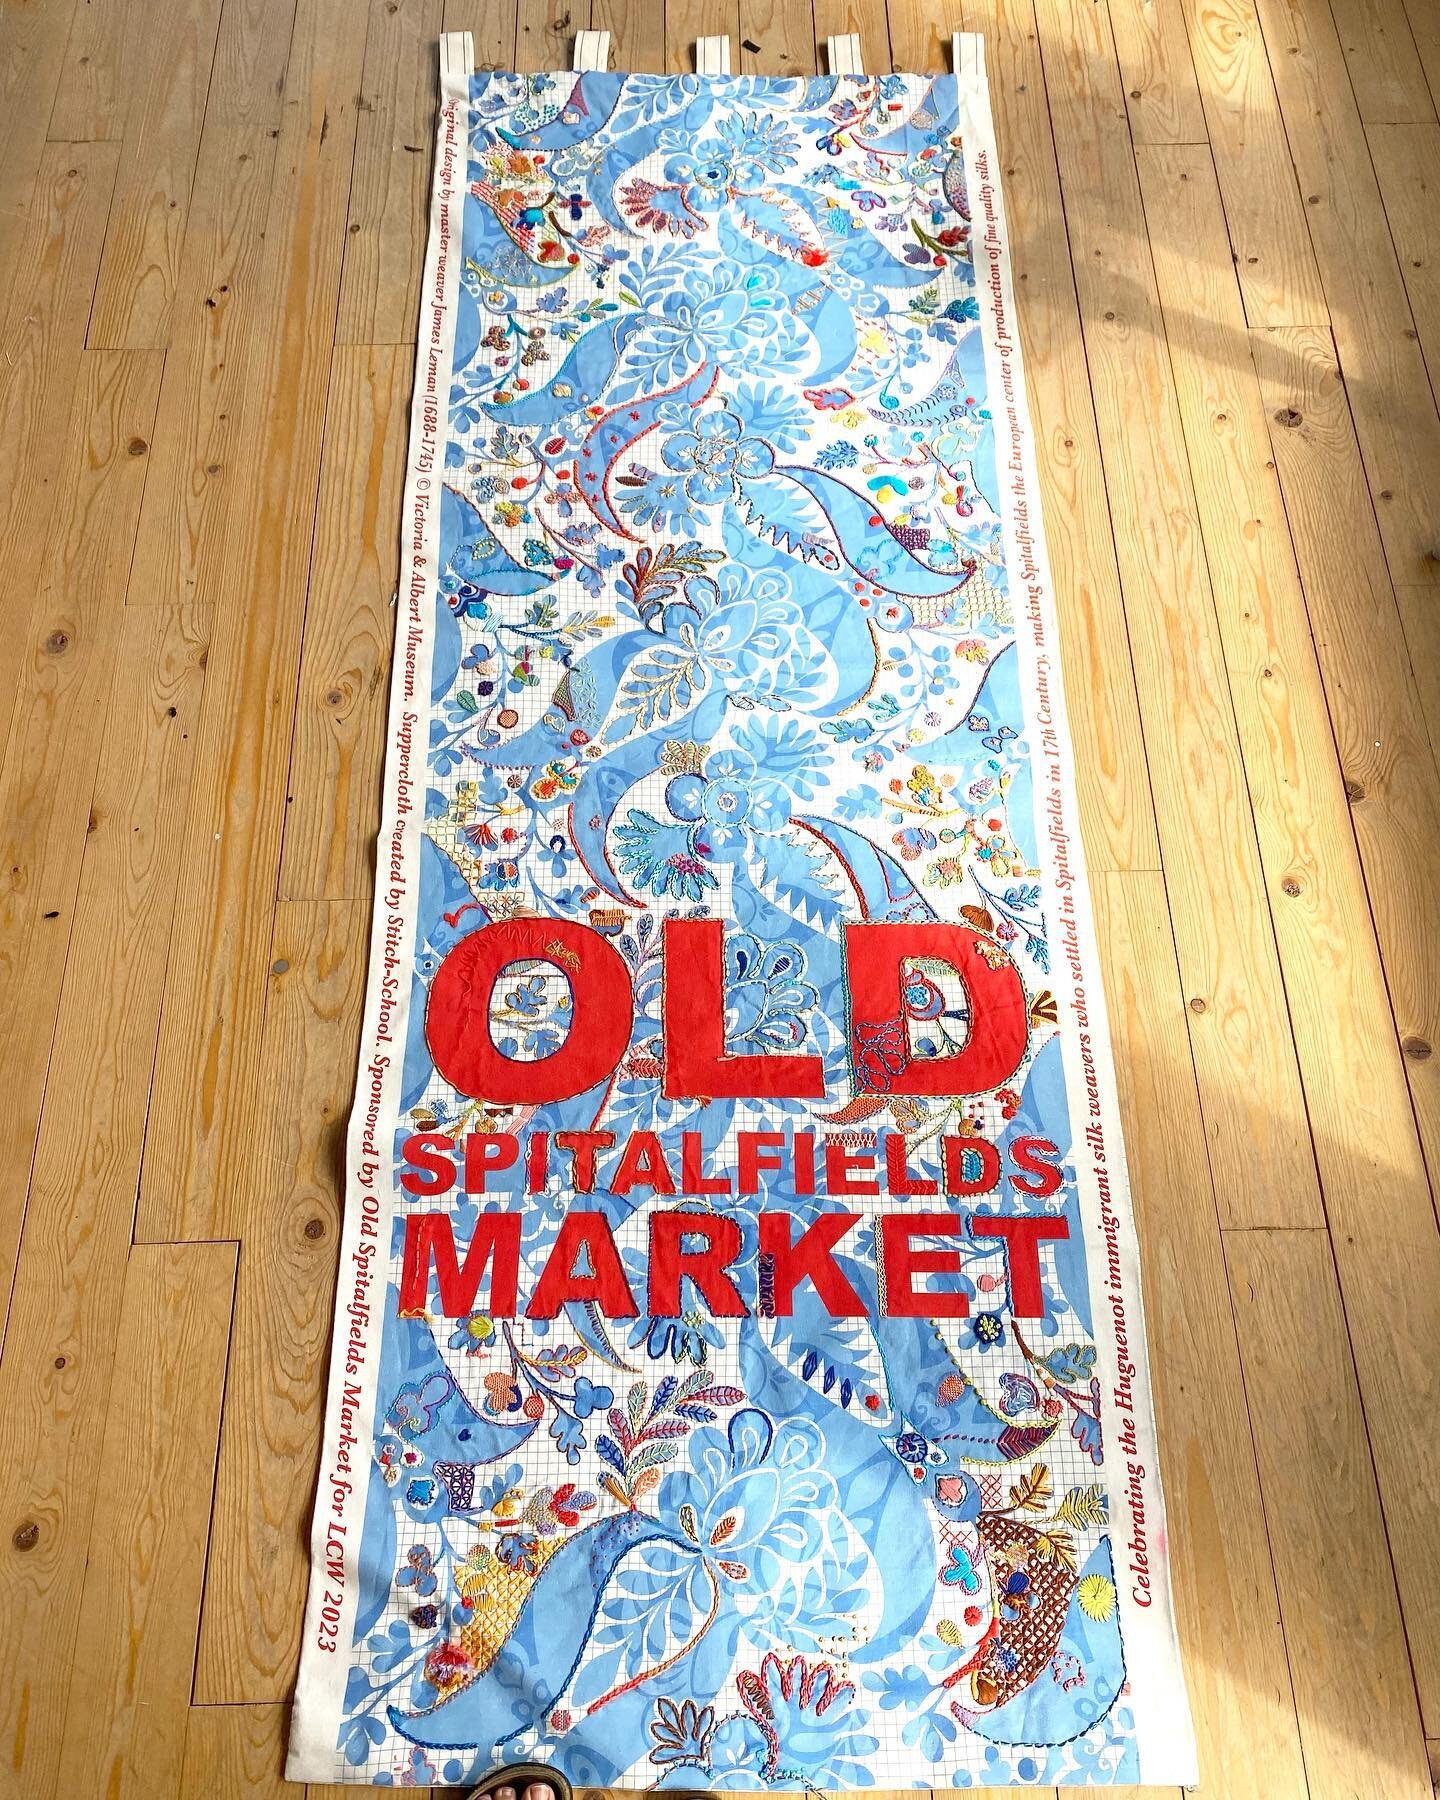 So pleased how this banner has turned out! It&rsquo;s ready to hang in @oldspitalfieldsmarket - stitched over 6 days as part of @londoncraftweek celebrating the history of the Huguenot weavers in Spitalfields - it&rsquo;s a beauty! #communitystitchin